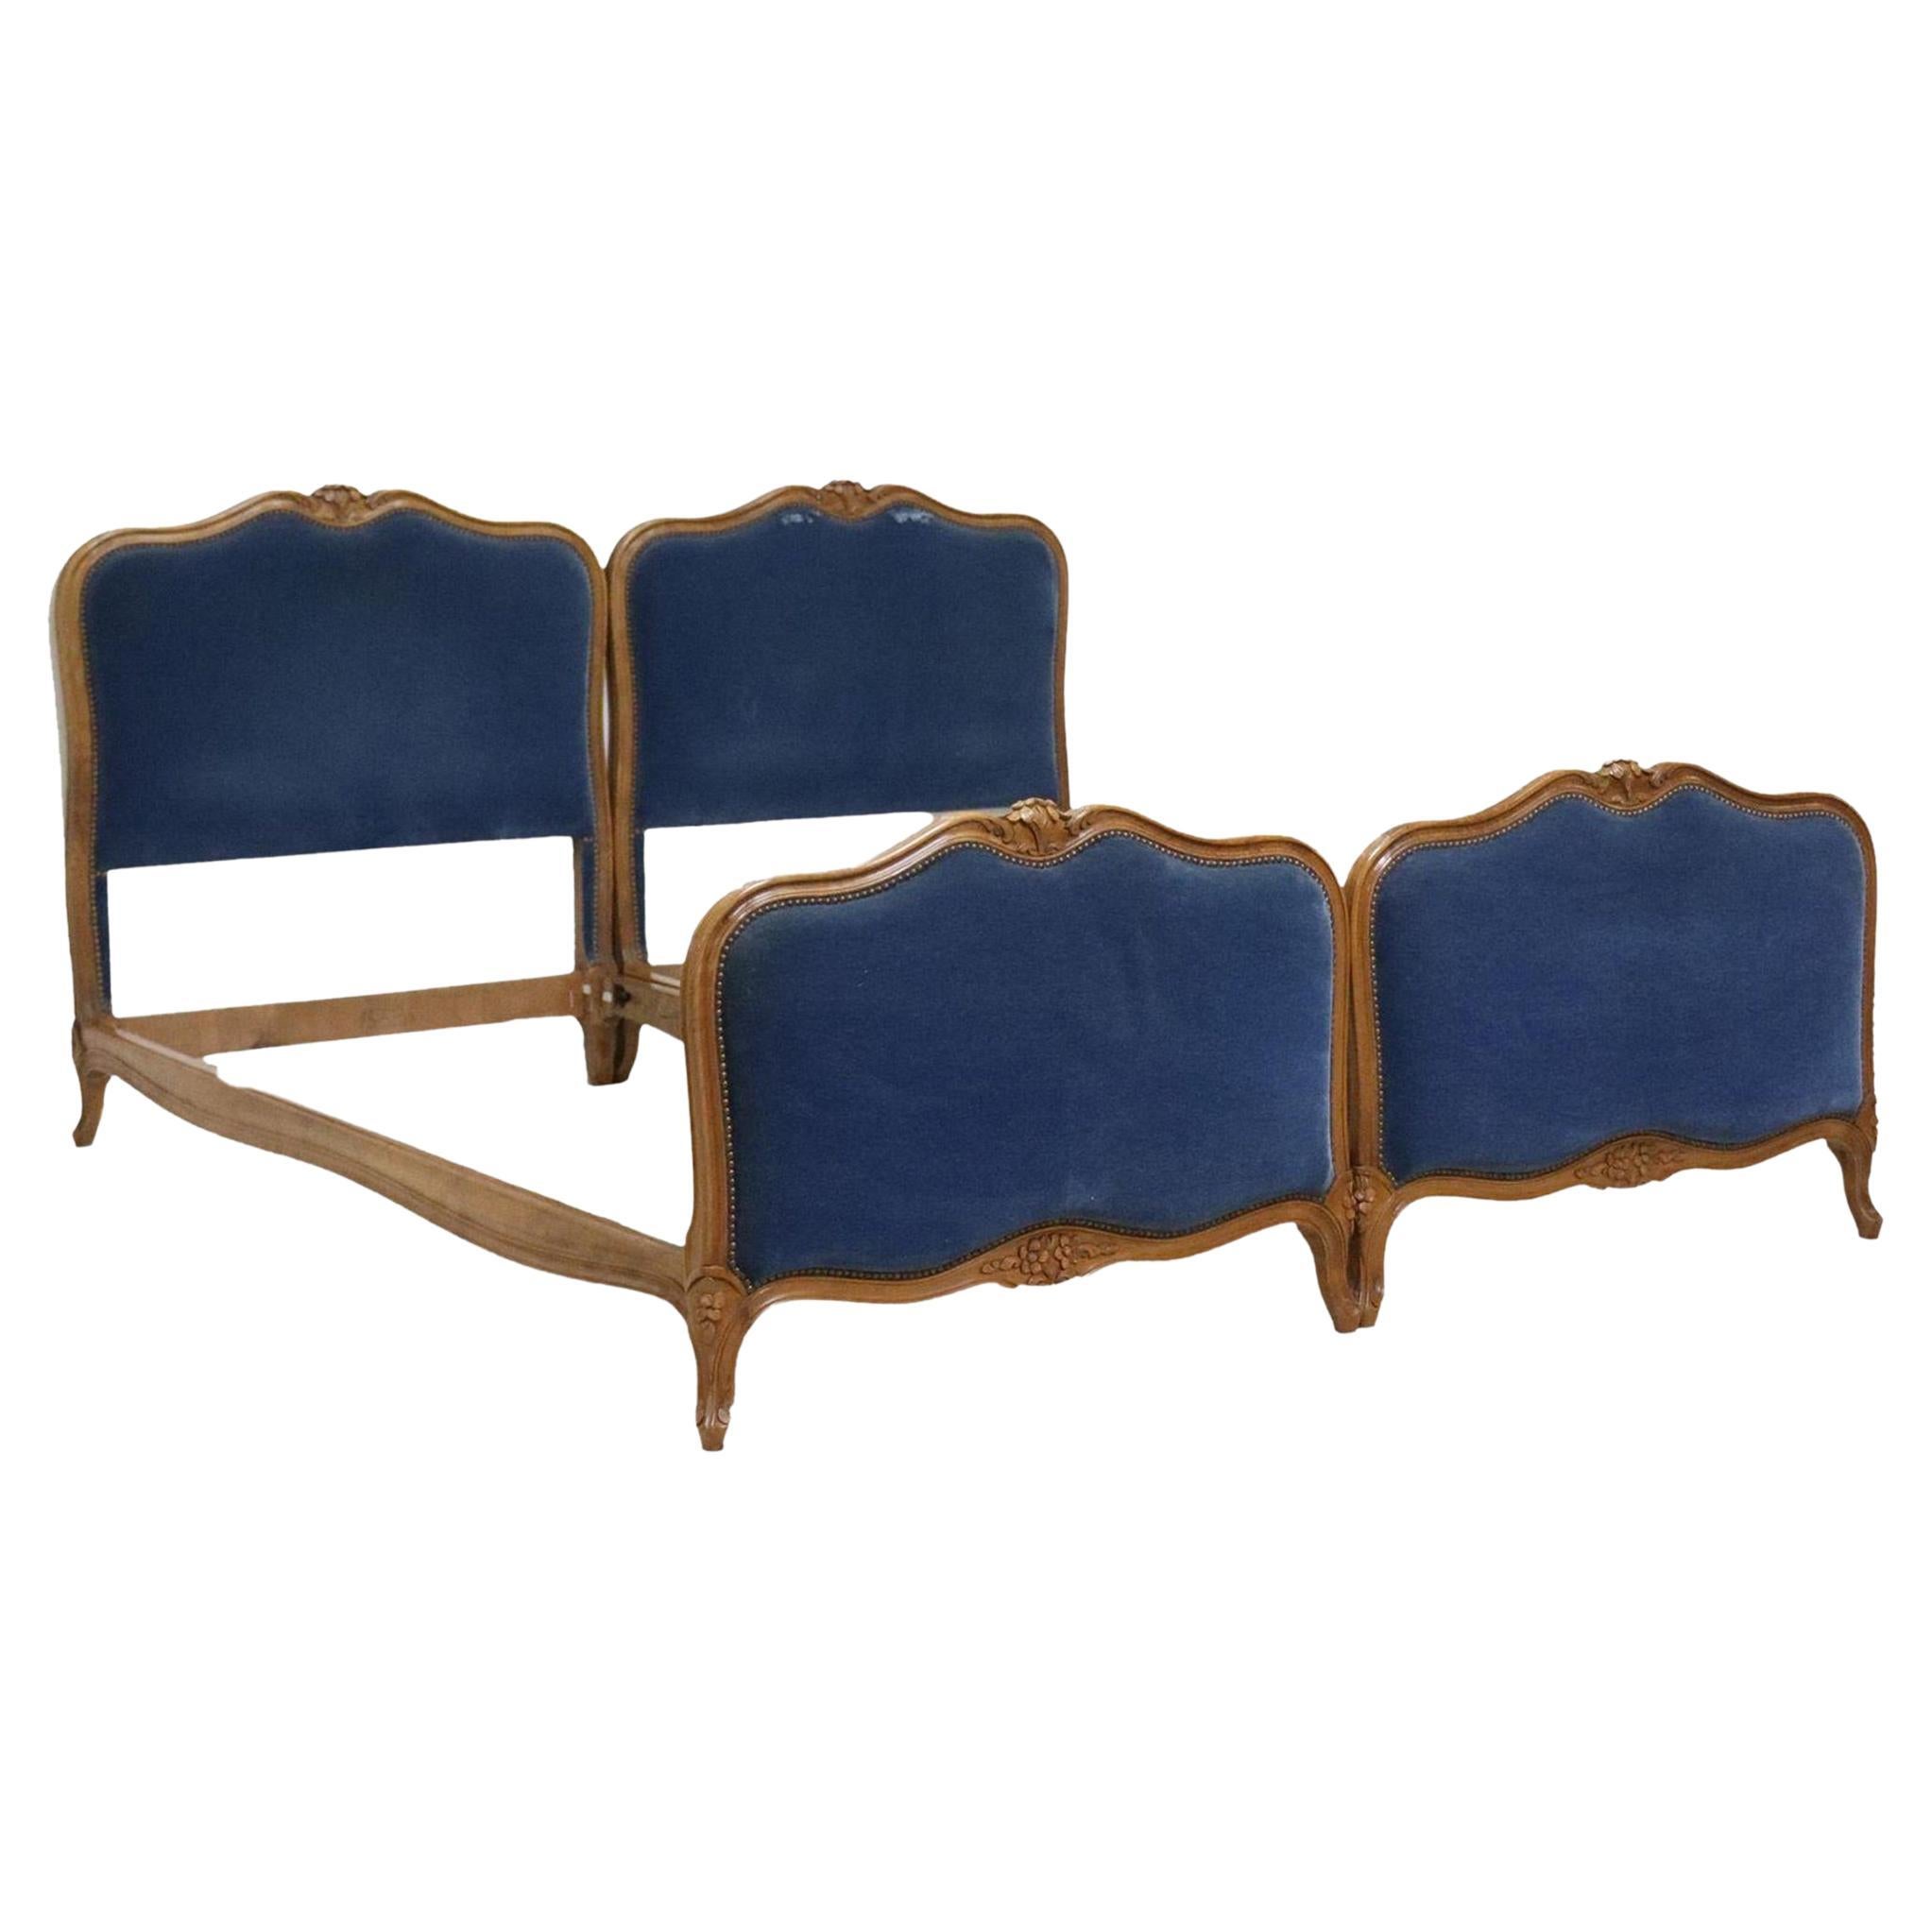 A lovely pair of antique French Louis XV style beds, 20th c. Each bed frame features carved floral crest, shaped frame in padded blue velvet upholstery, with nailhead trim, rising on cabriole legs, ending on whorl feet.

Dimensions
exterior: approx